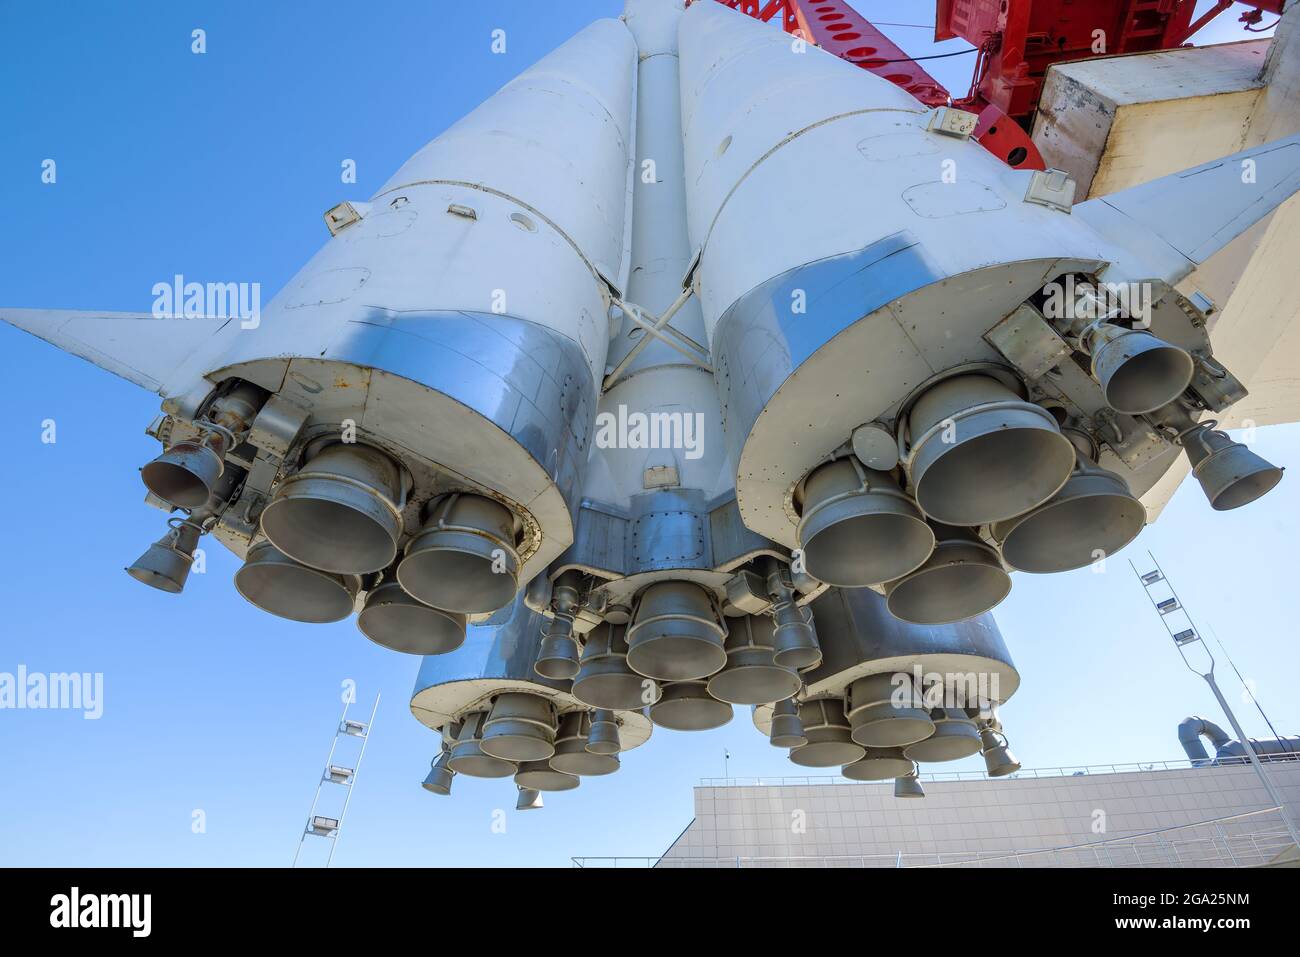 KALUGA, RUSSIA - JULY 07, 2021: Engines and nozzles of the Vostok space rocket installed by the State Museum of Cosmonautics, close-up Stock Photo